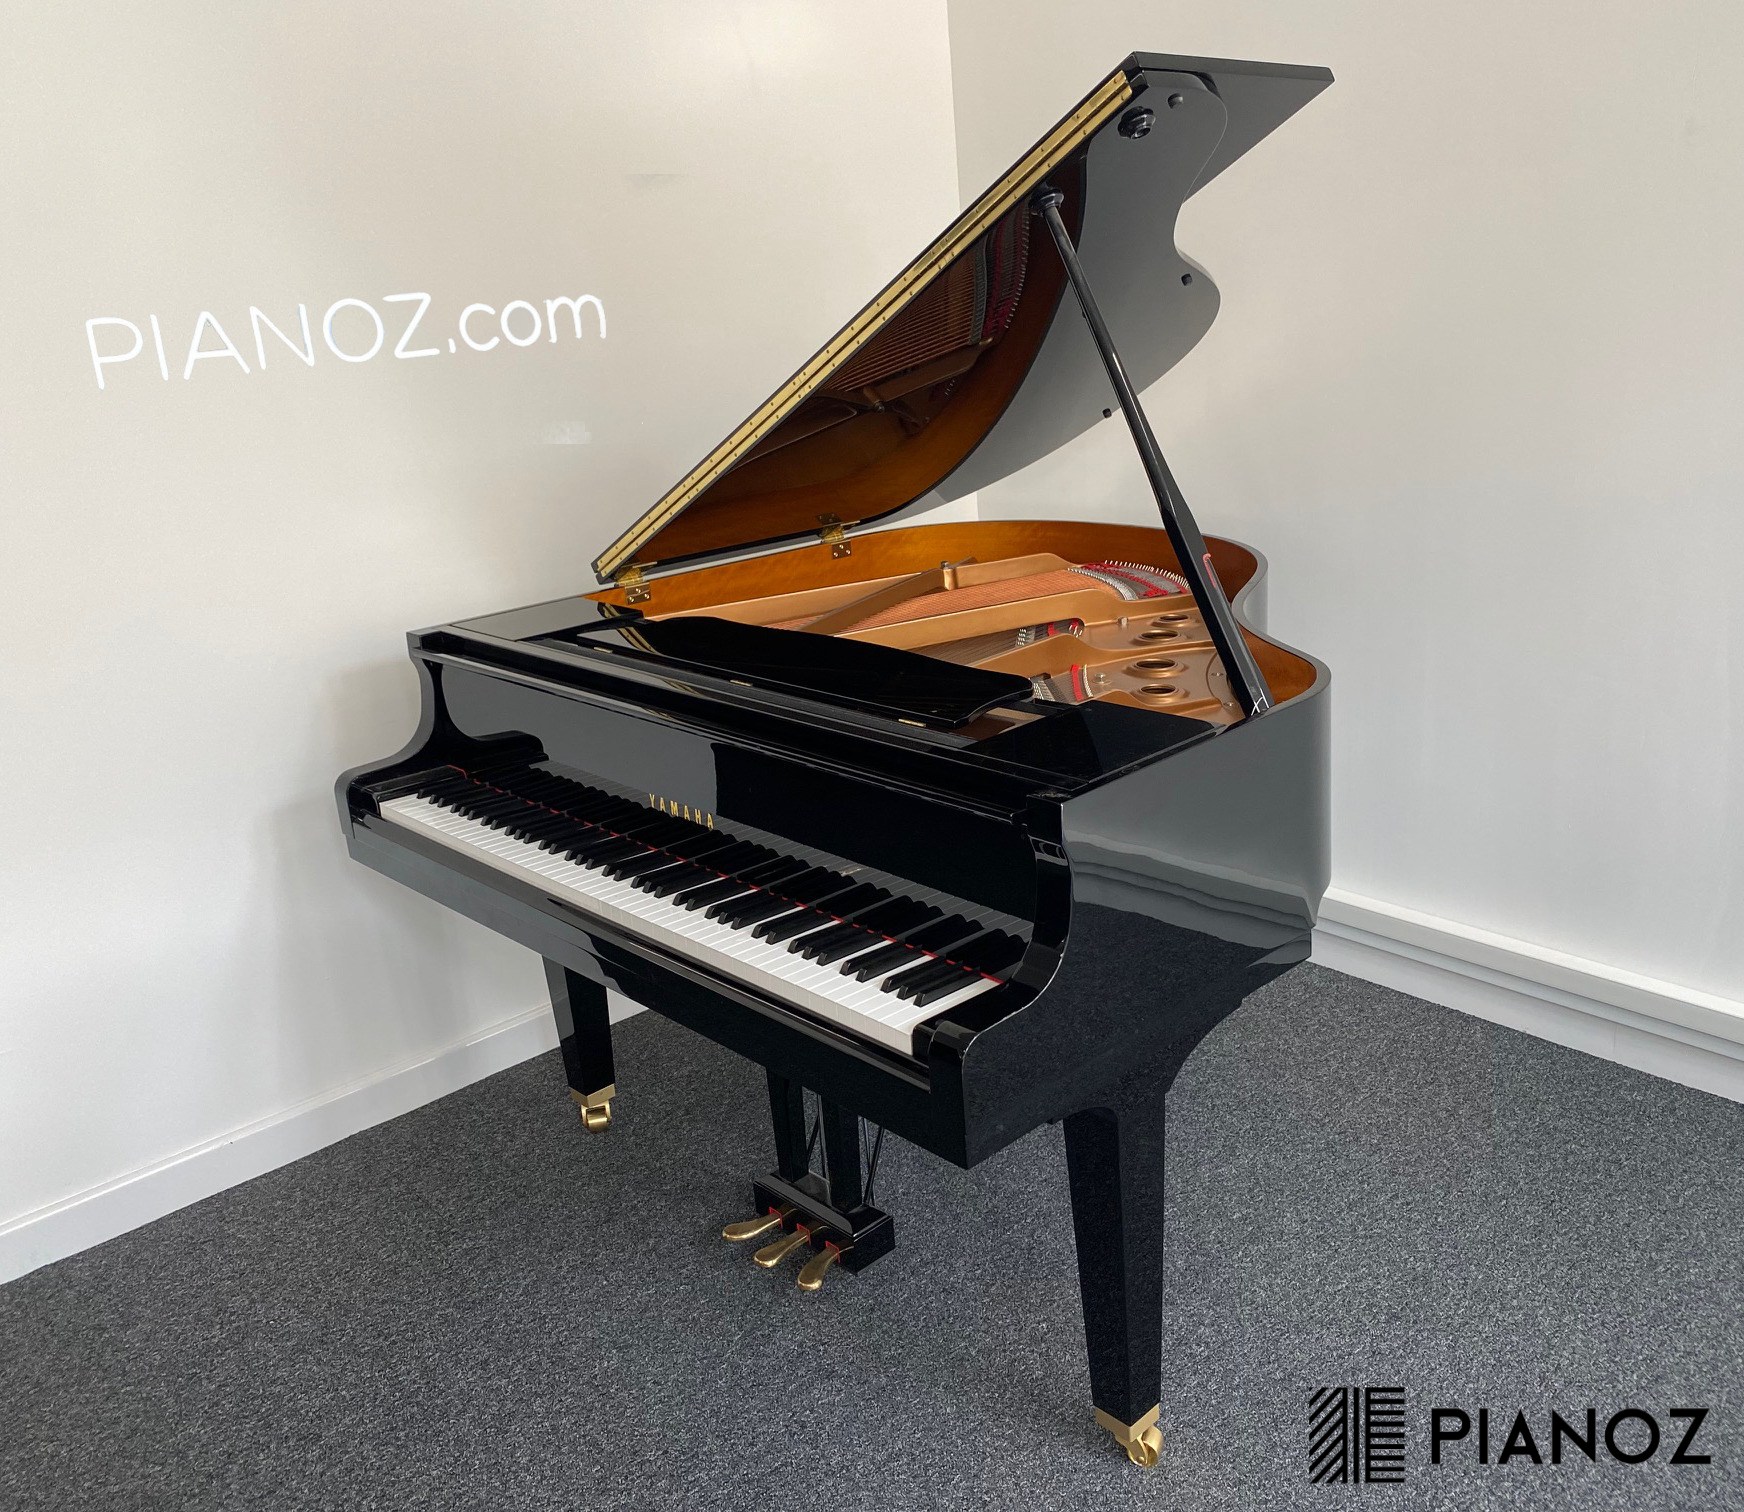 Yamaha GB1K Silent System Baby Grand Piano piano for sale in UK